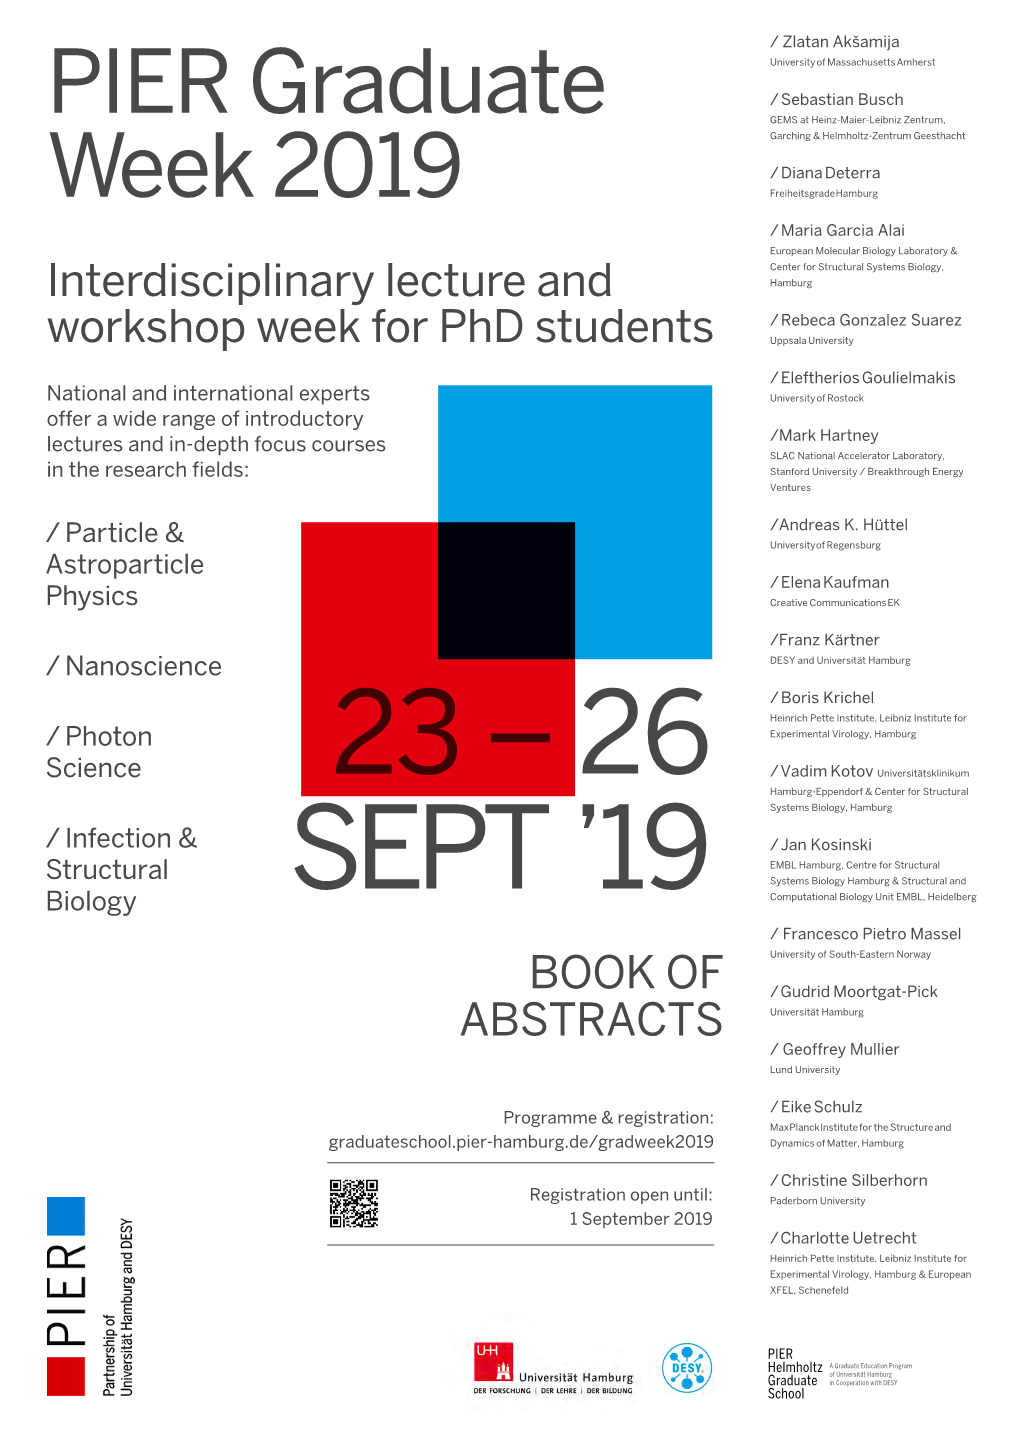 Interdisciplinary Lecture and Workshop Week for Phd